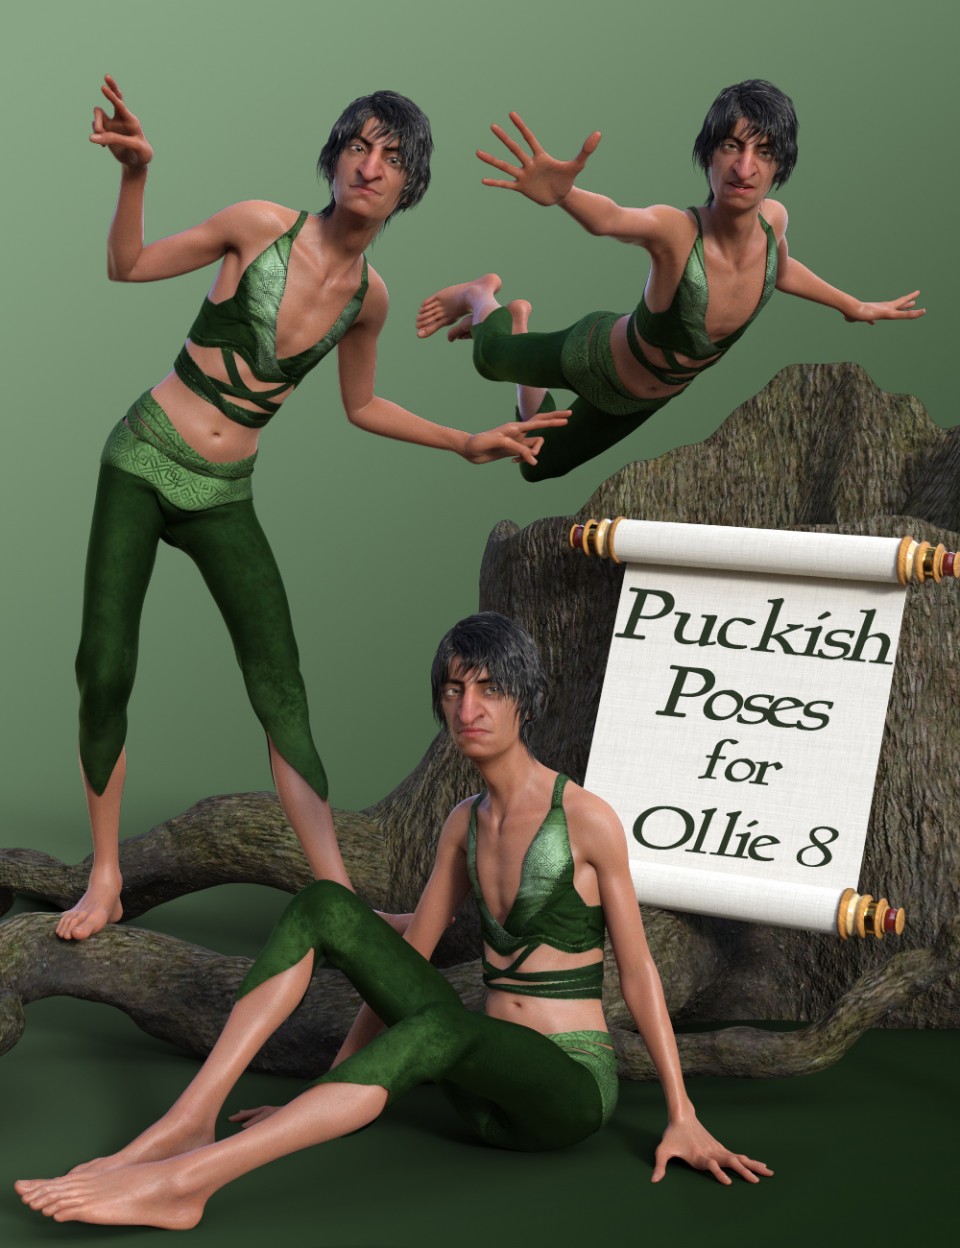 Puckish Poses for Ollie 8